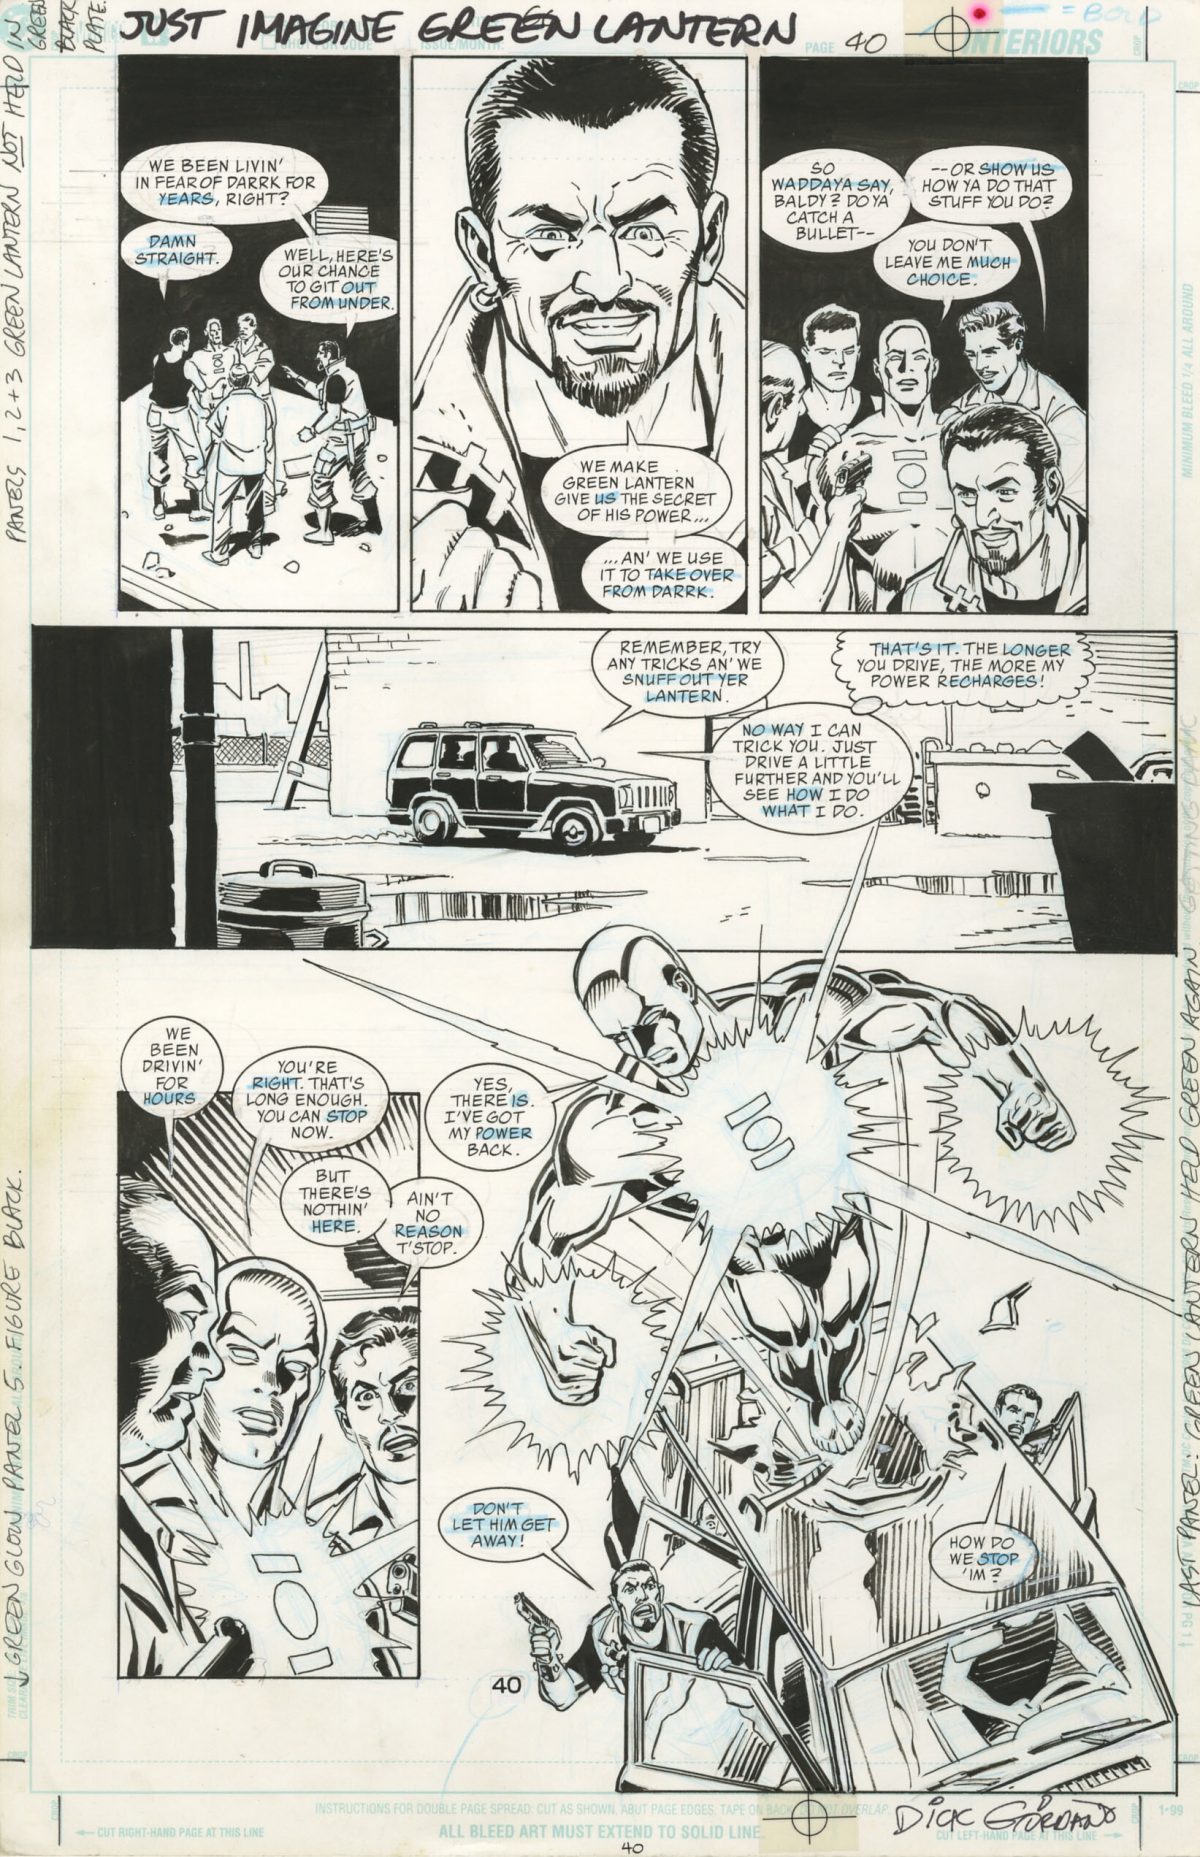 Just Imagine with Stan LEE by Dave Gibbons